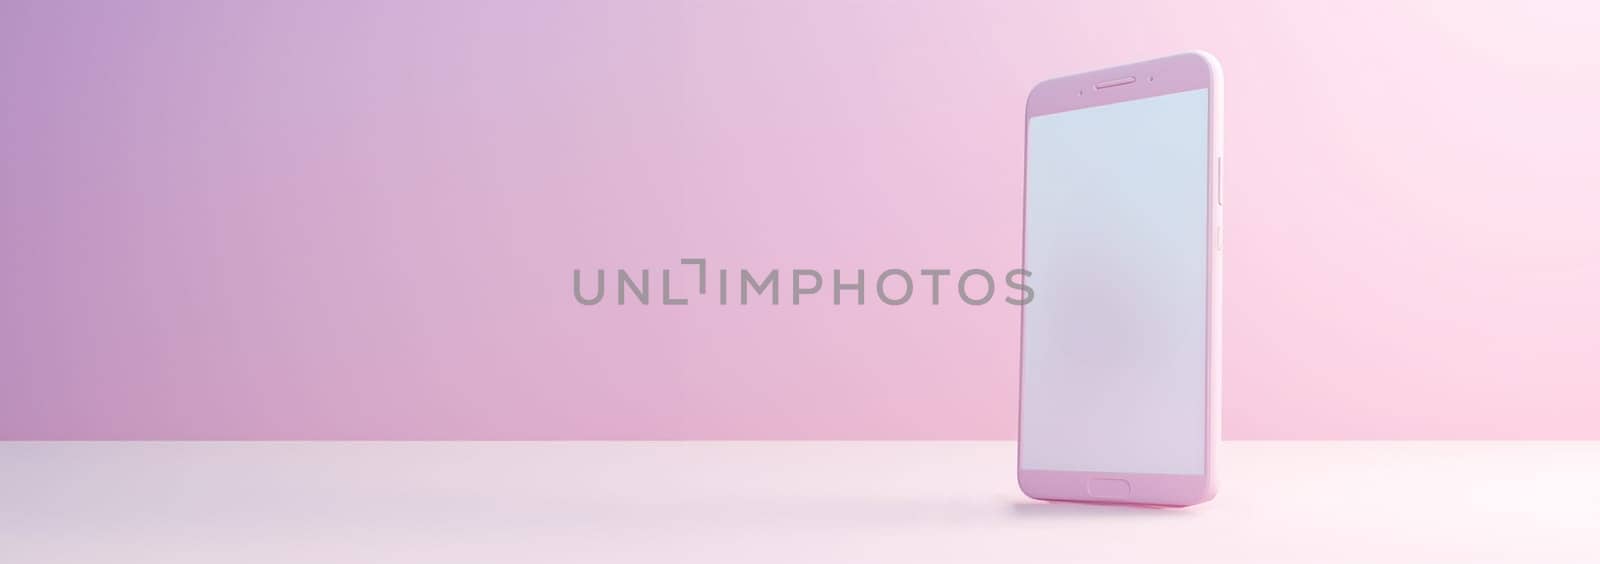 Minimalist modern clay mockup smartphones for presentation, application display, information graphics etc. EPS. 3D pastel pink Copy space smartphone mobile concept Space for text